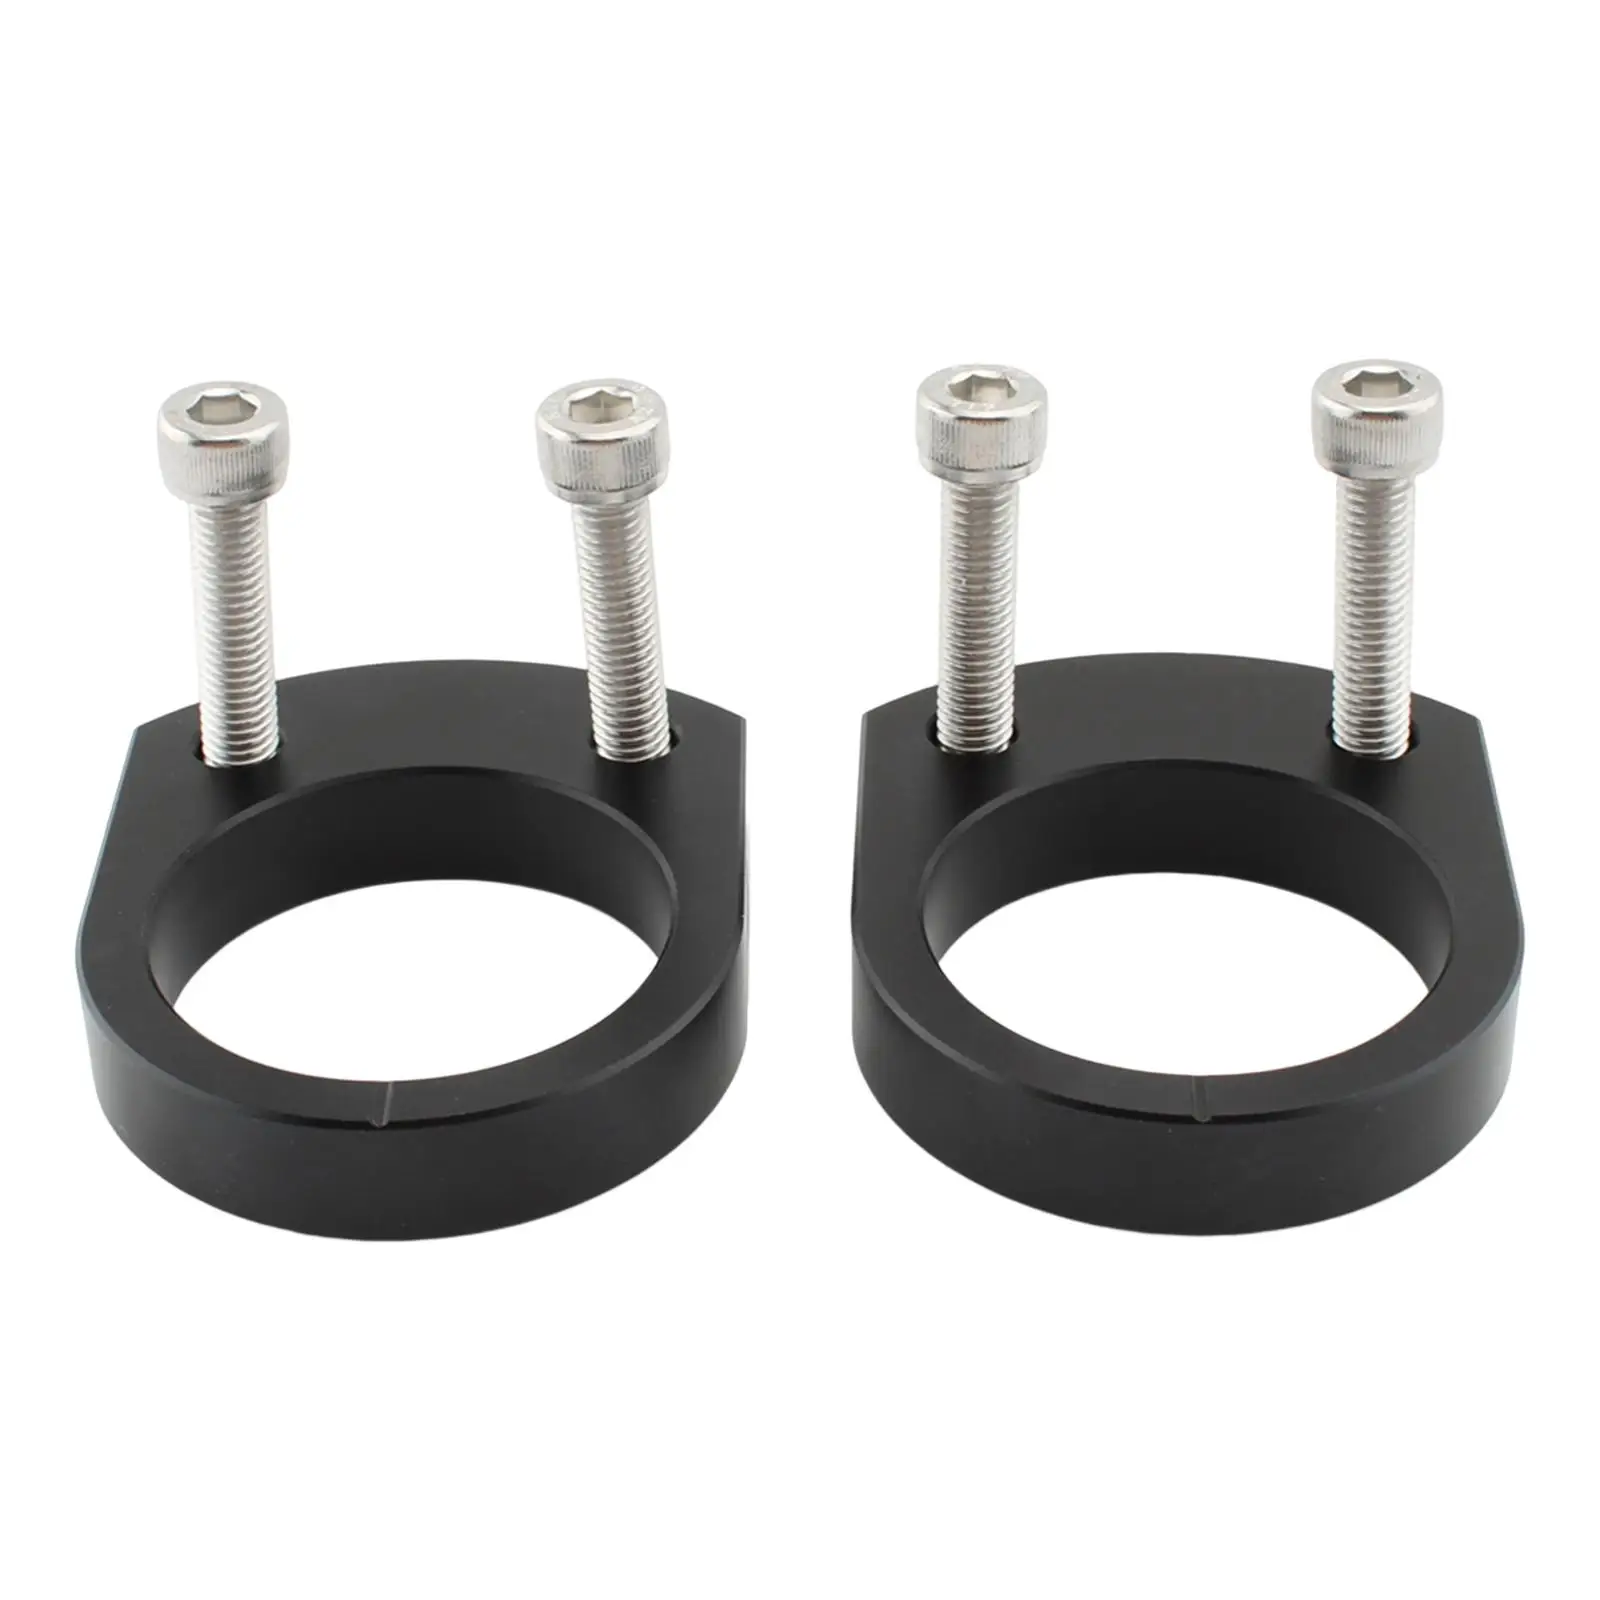 2 Pieces Motorcycle Handlebar Risers 14mm Heightened Handle Bar Riser Clamp for Kawasaki ZX-14R Zzr14 Motorbike Accessories